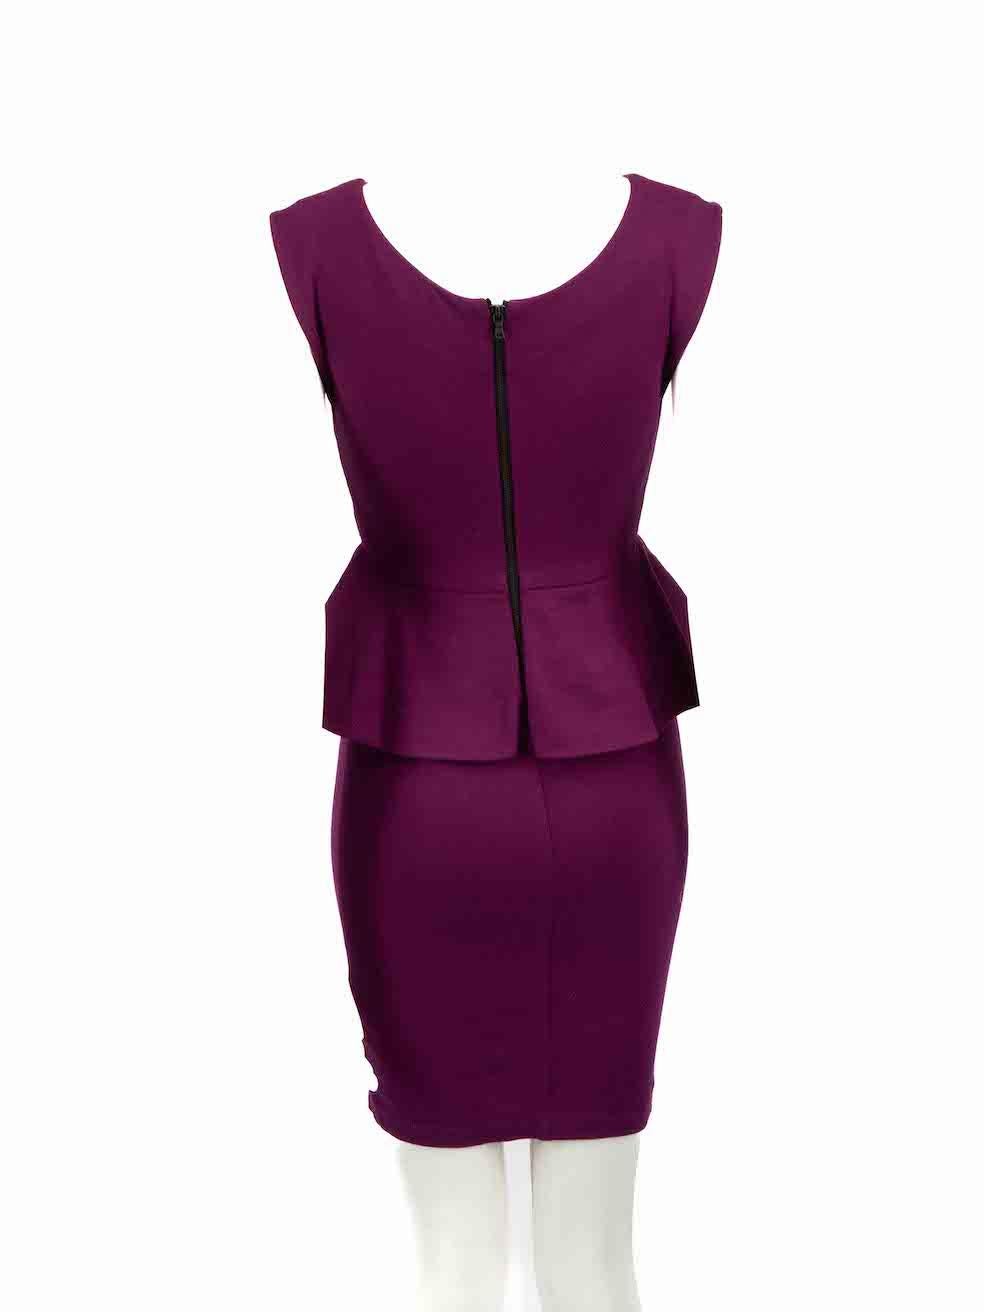 Alice + Olivia Purple Peplum Knee-Length Dress Size S In Good Condition For Sale In London, GB